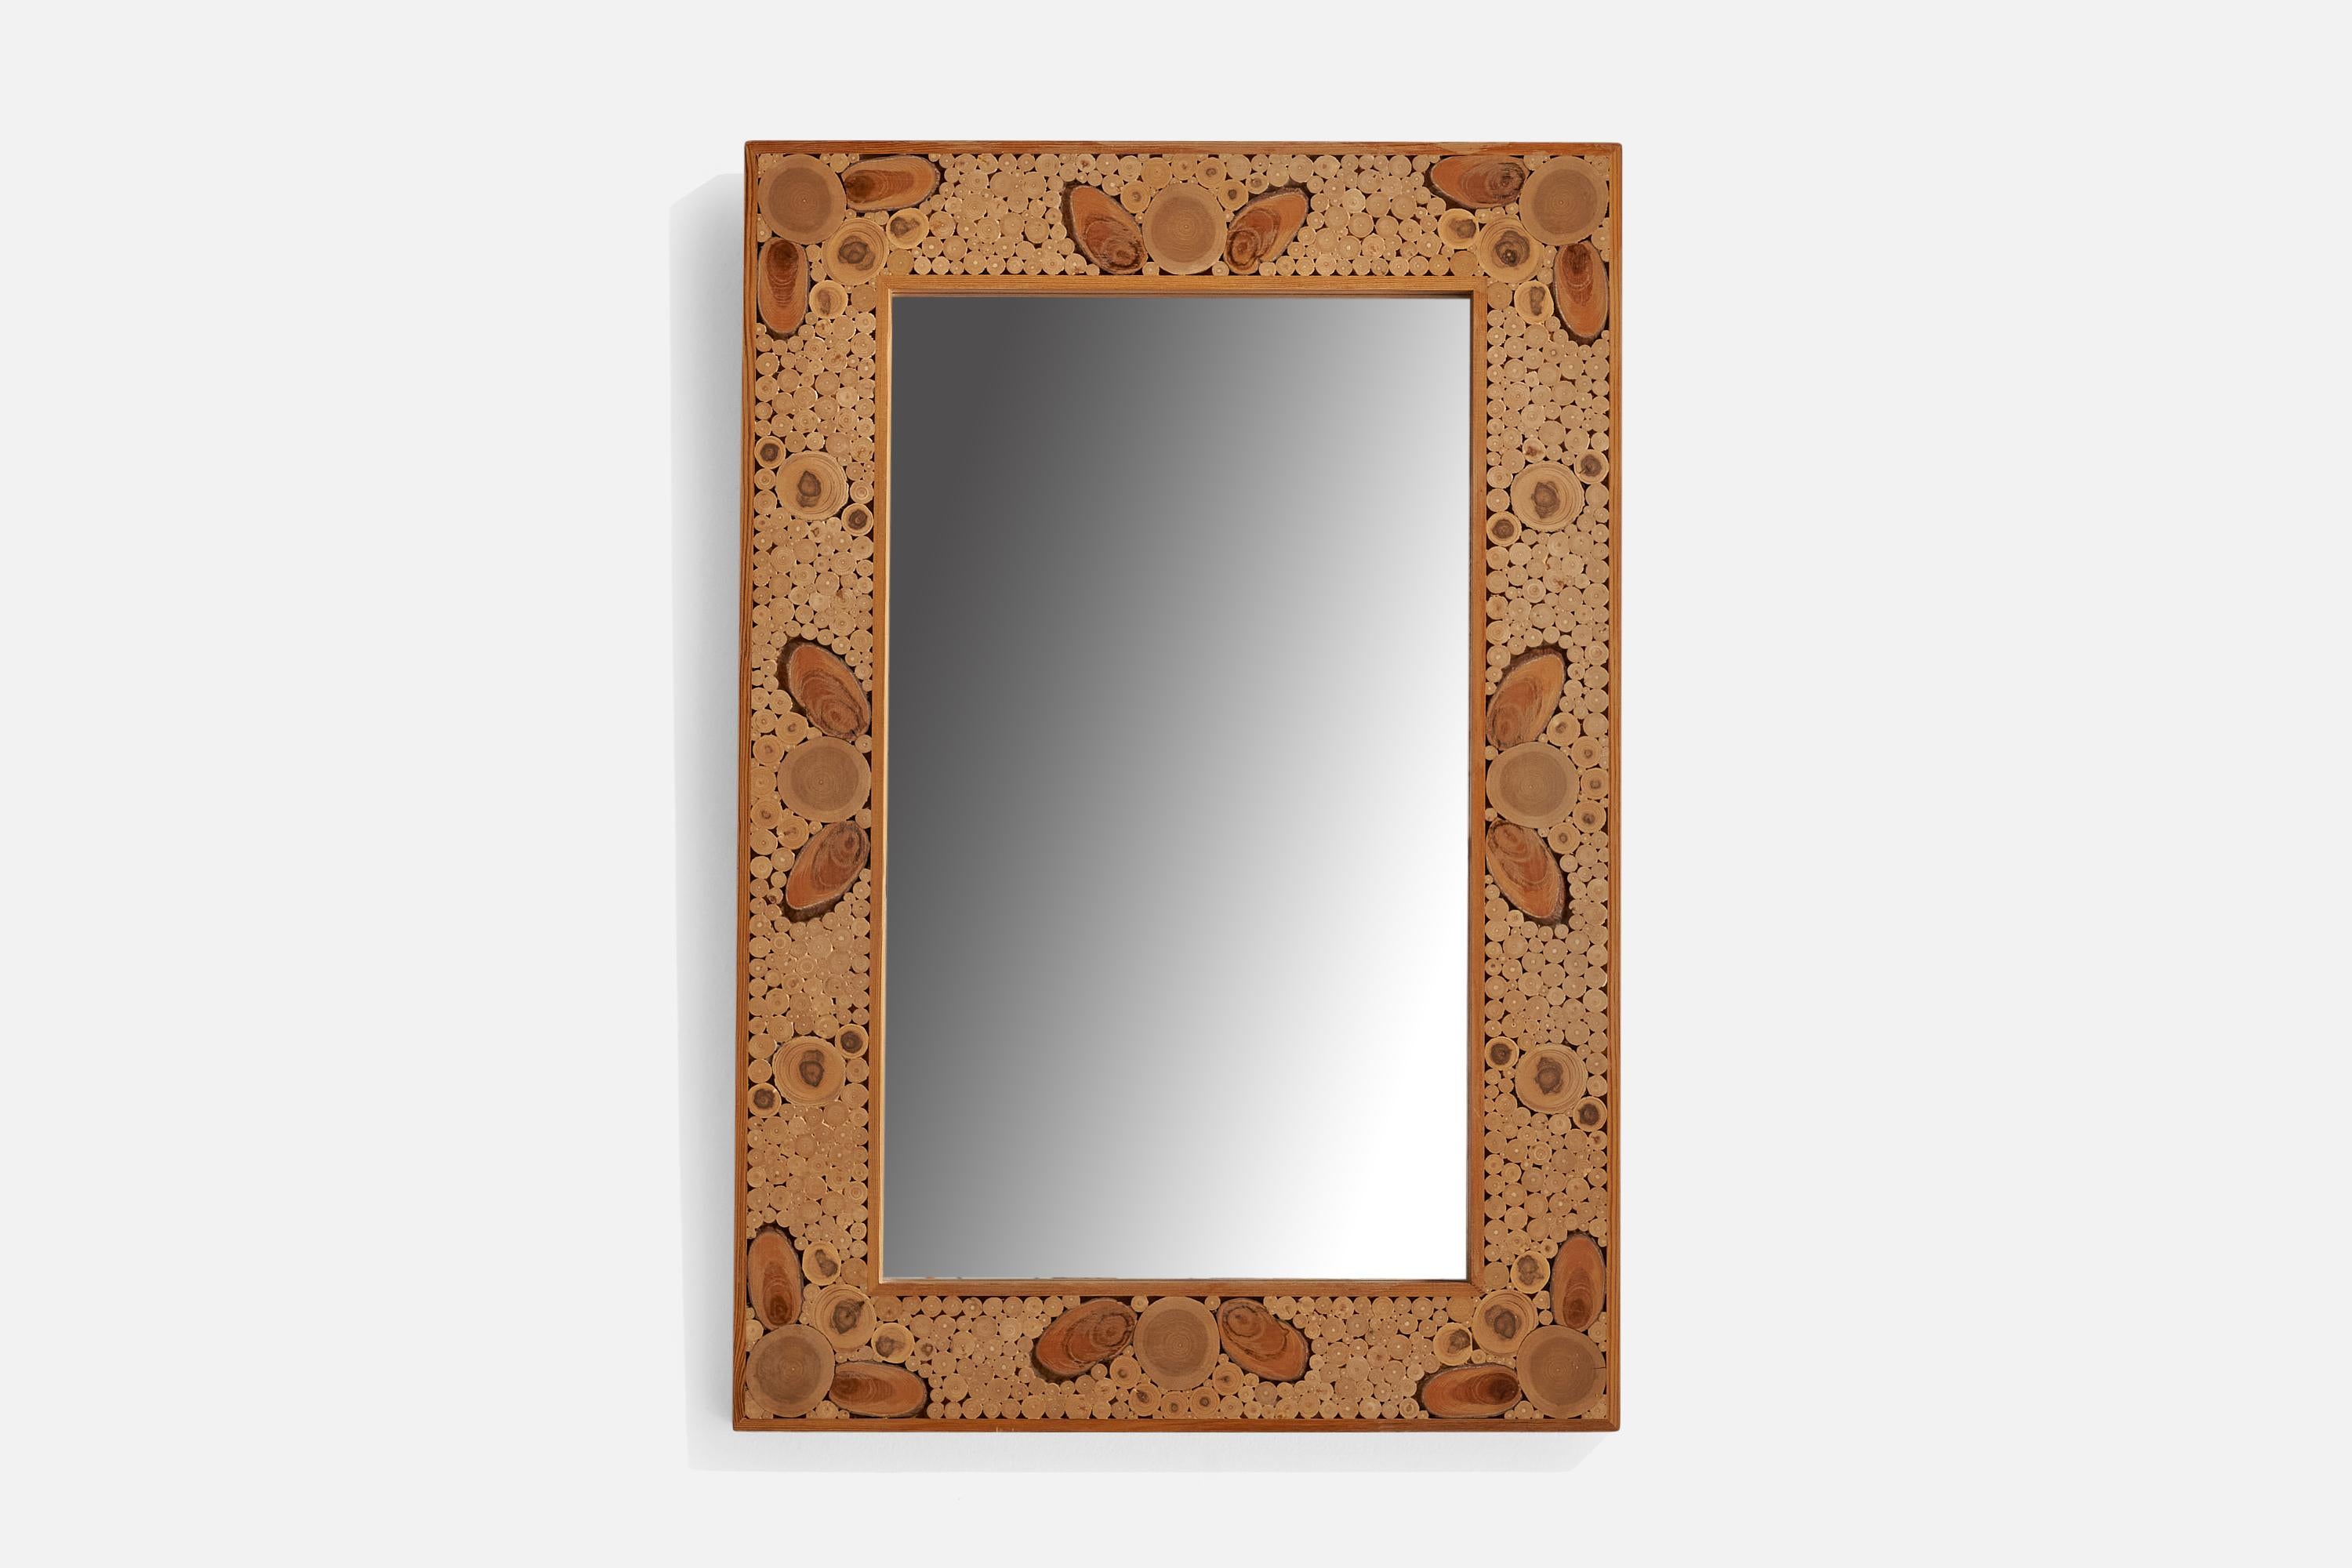 A wood wall mirror designed and produced in Sweden, 1975.